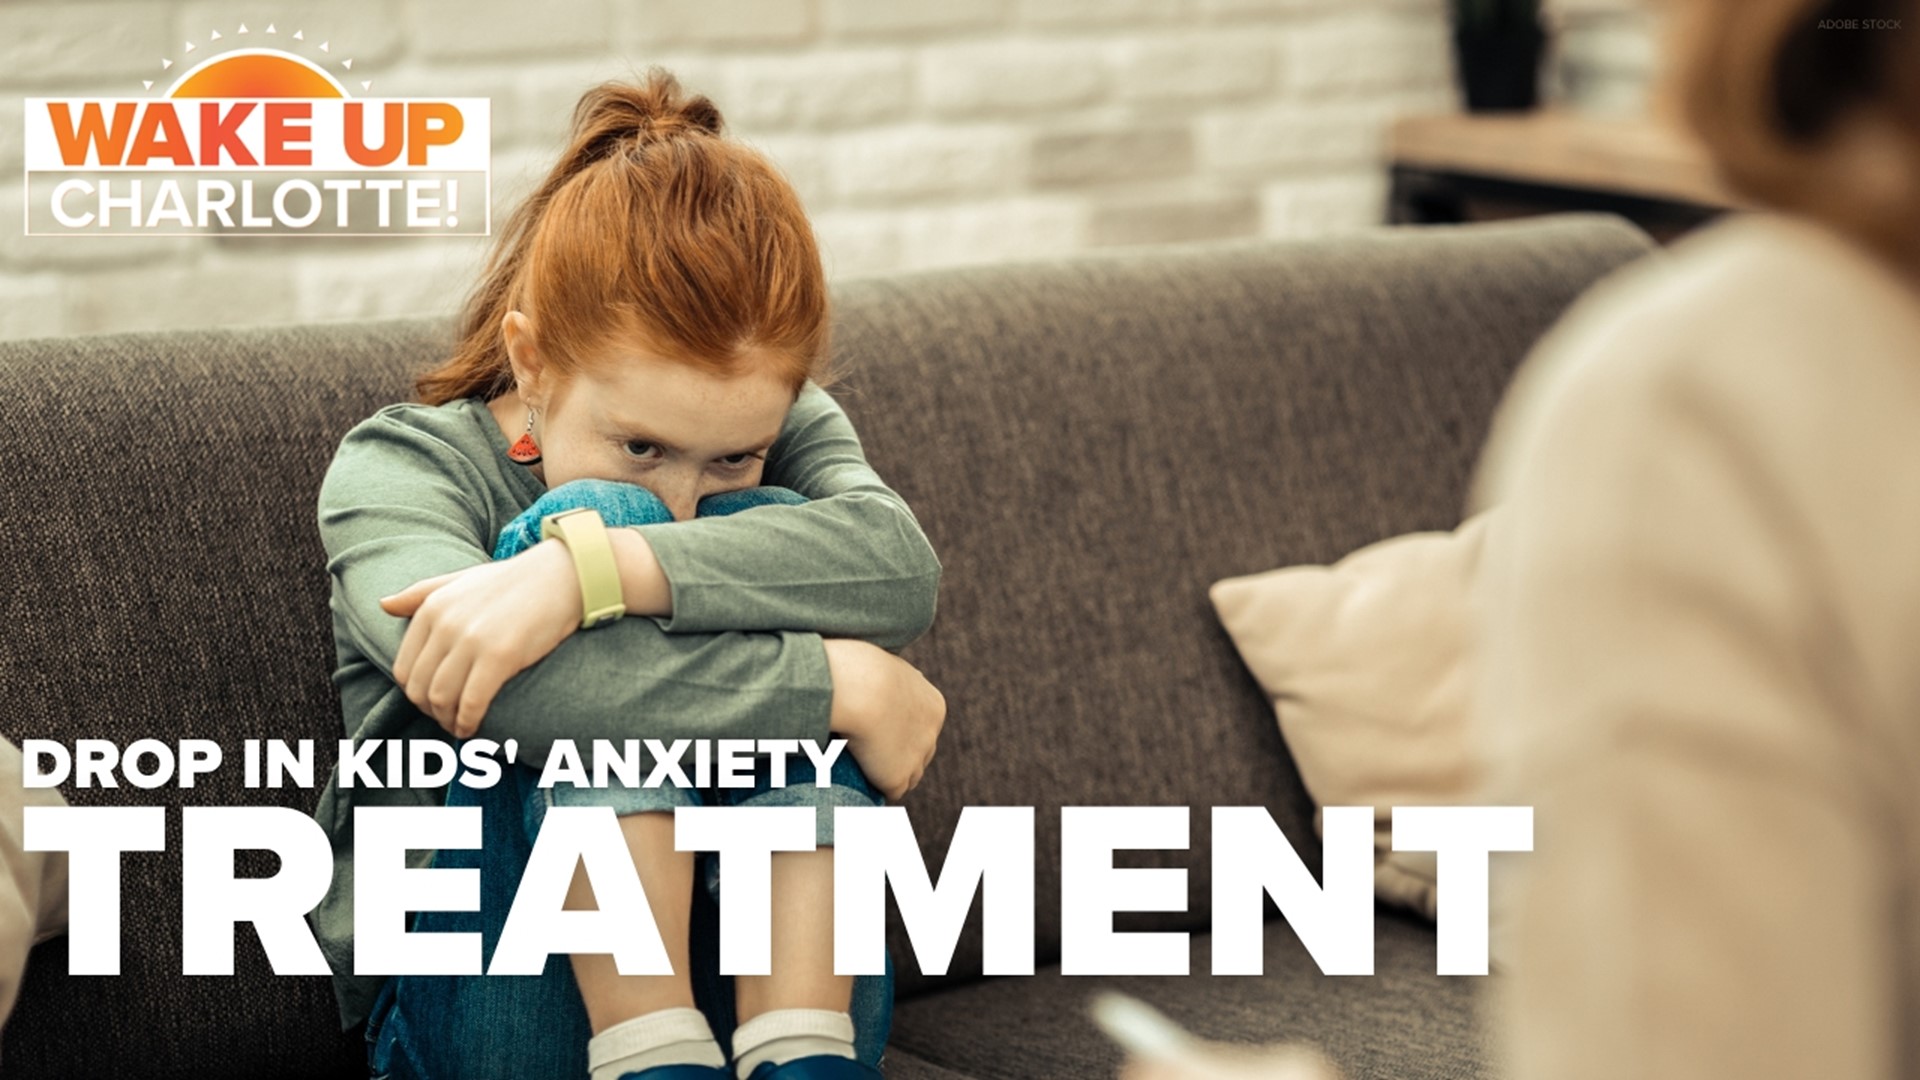 As the number of kids who get on anxiety medication rises, the number of children receiving therapy has dropped.